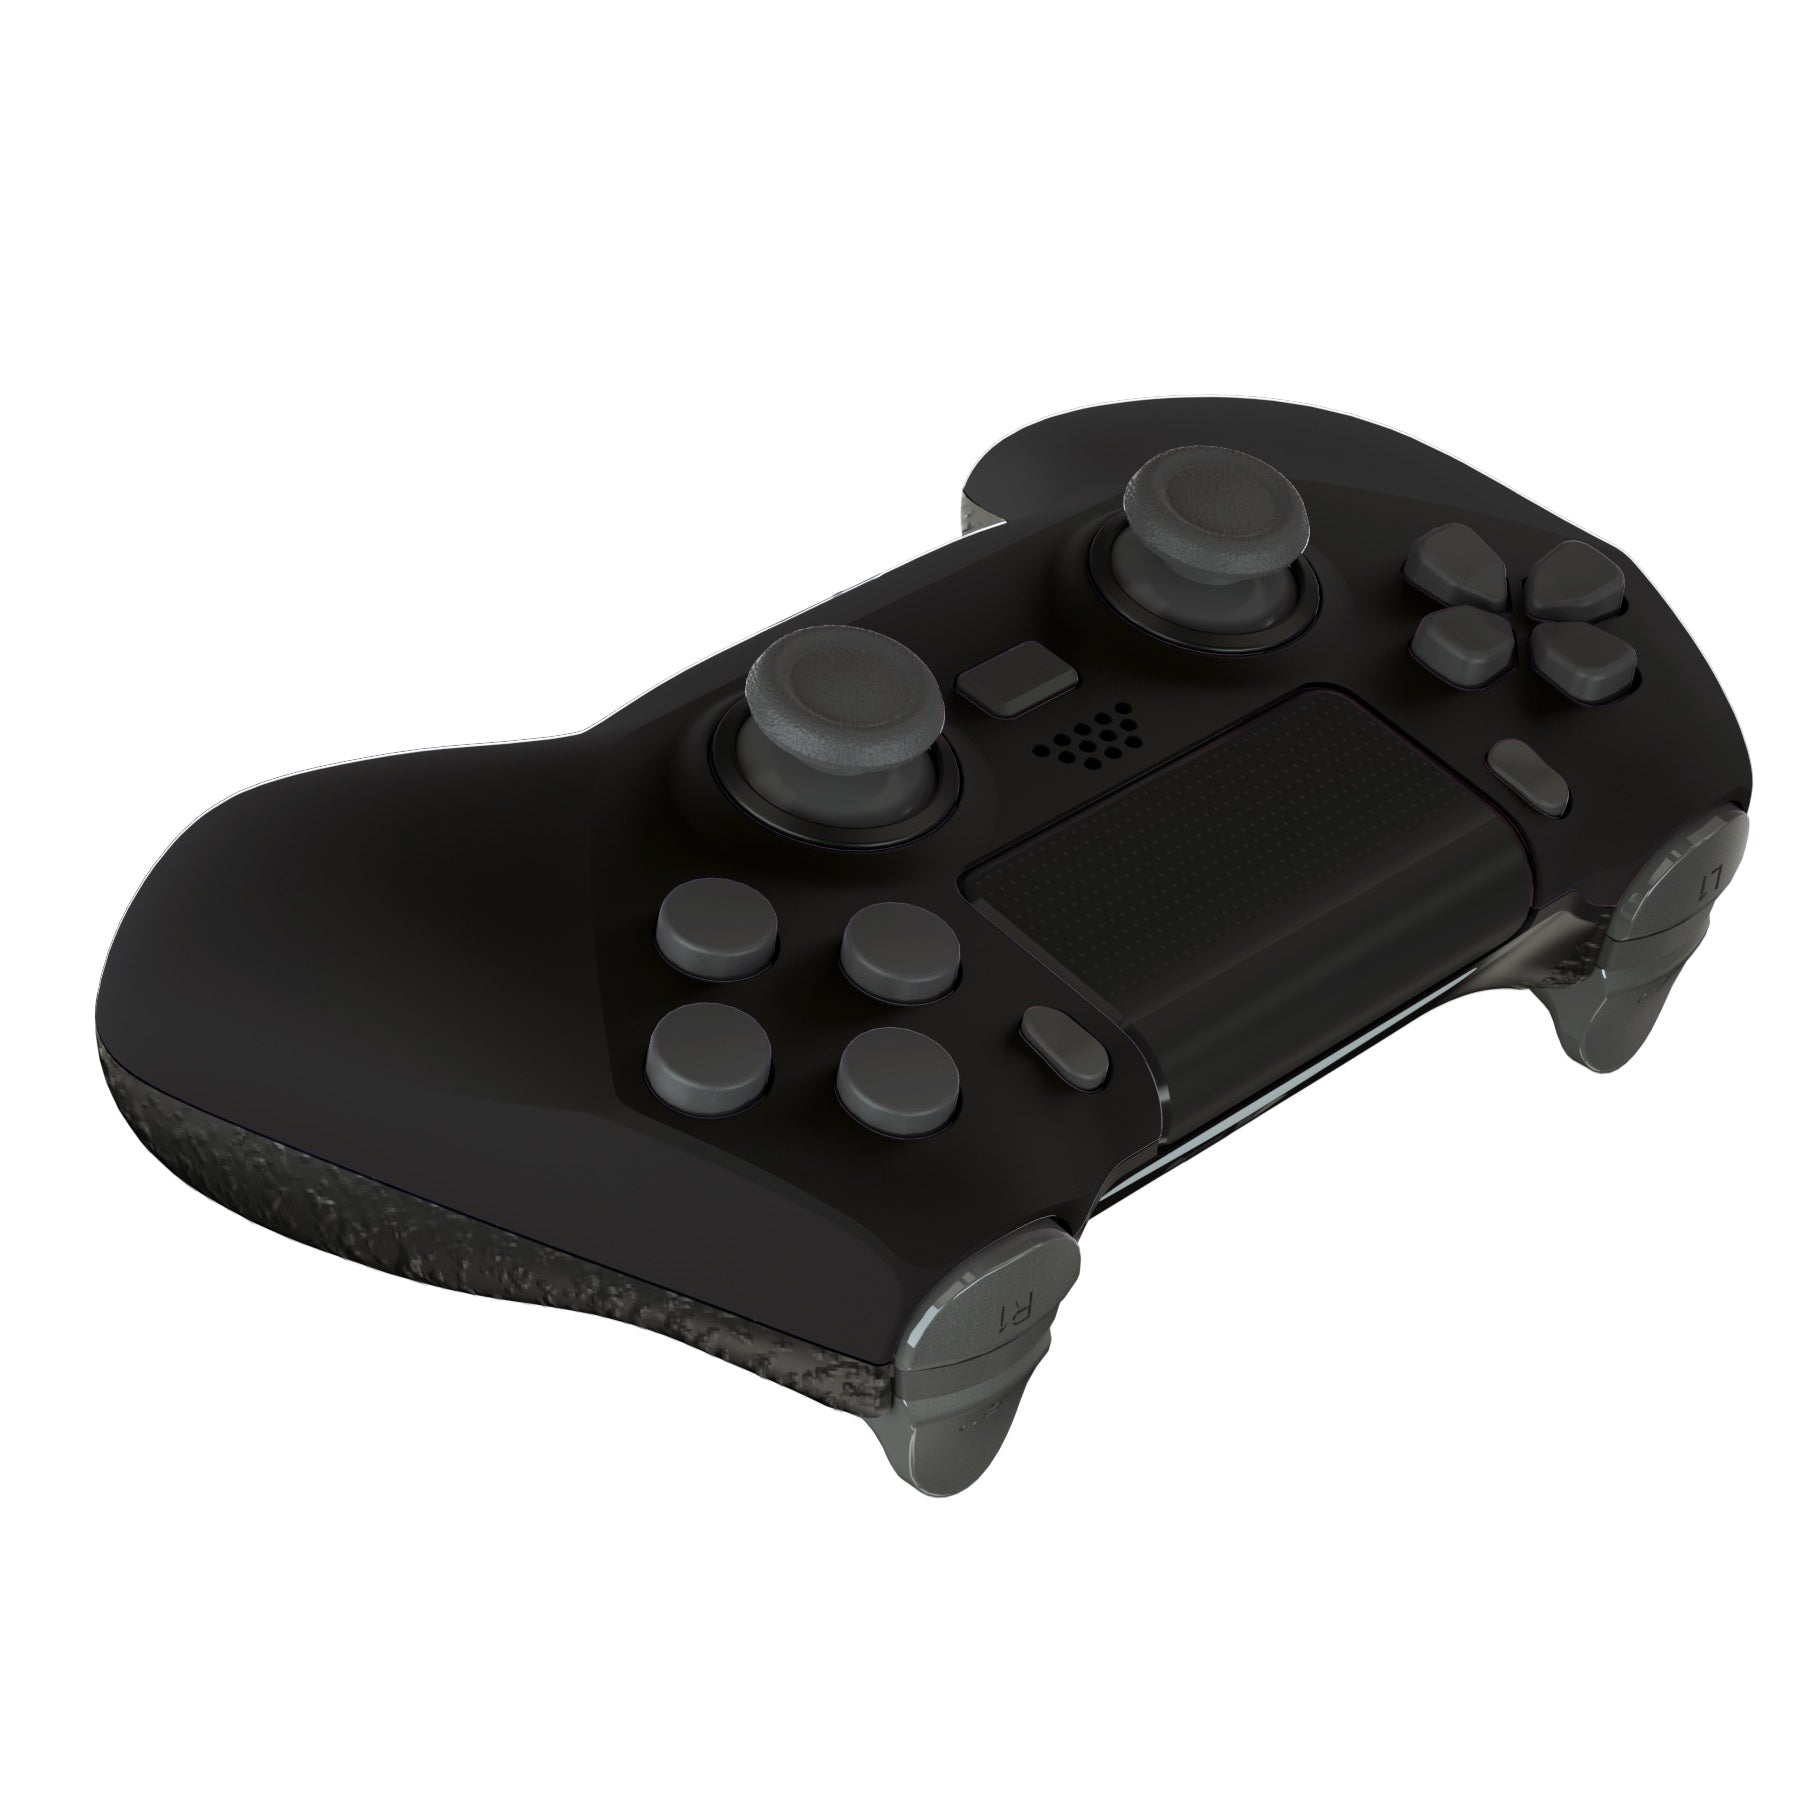 eXtremeRate Retail Black DECADE Tournament Controller (DTC) Upgrade Kit for ps4 Controller JDM-040/050/055, Upgrade Board & Ergonomic Shell & Back Buttons & Trigger Stops - Controller NOT Included - P4MG002